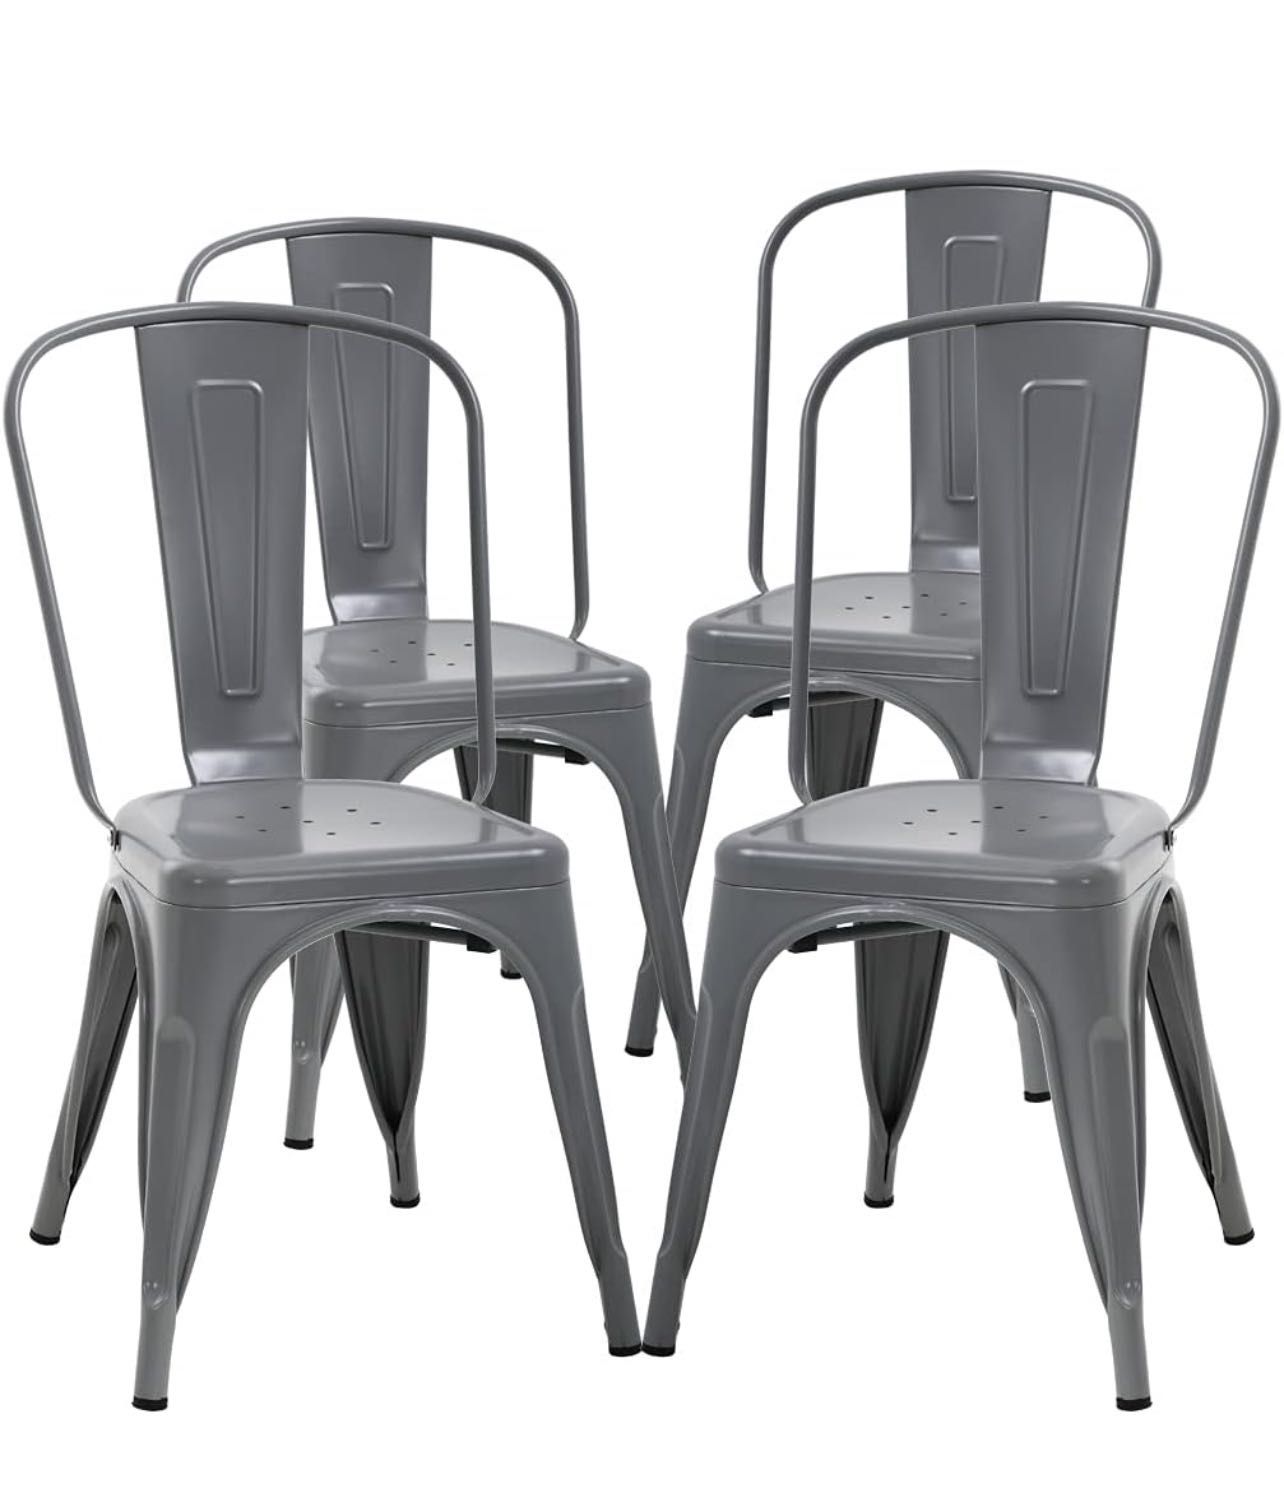 Metal Dining Chairs Indoor-Outdoor Stackable Chic Restaurant Side Bistro Chair Set of 4, 18 Inch Seat Height, 330LBS Weight Capacity, Cafe Tolix Kitch